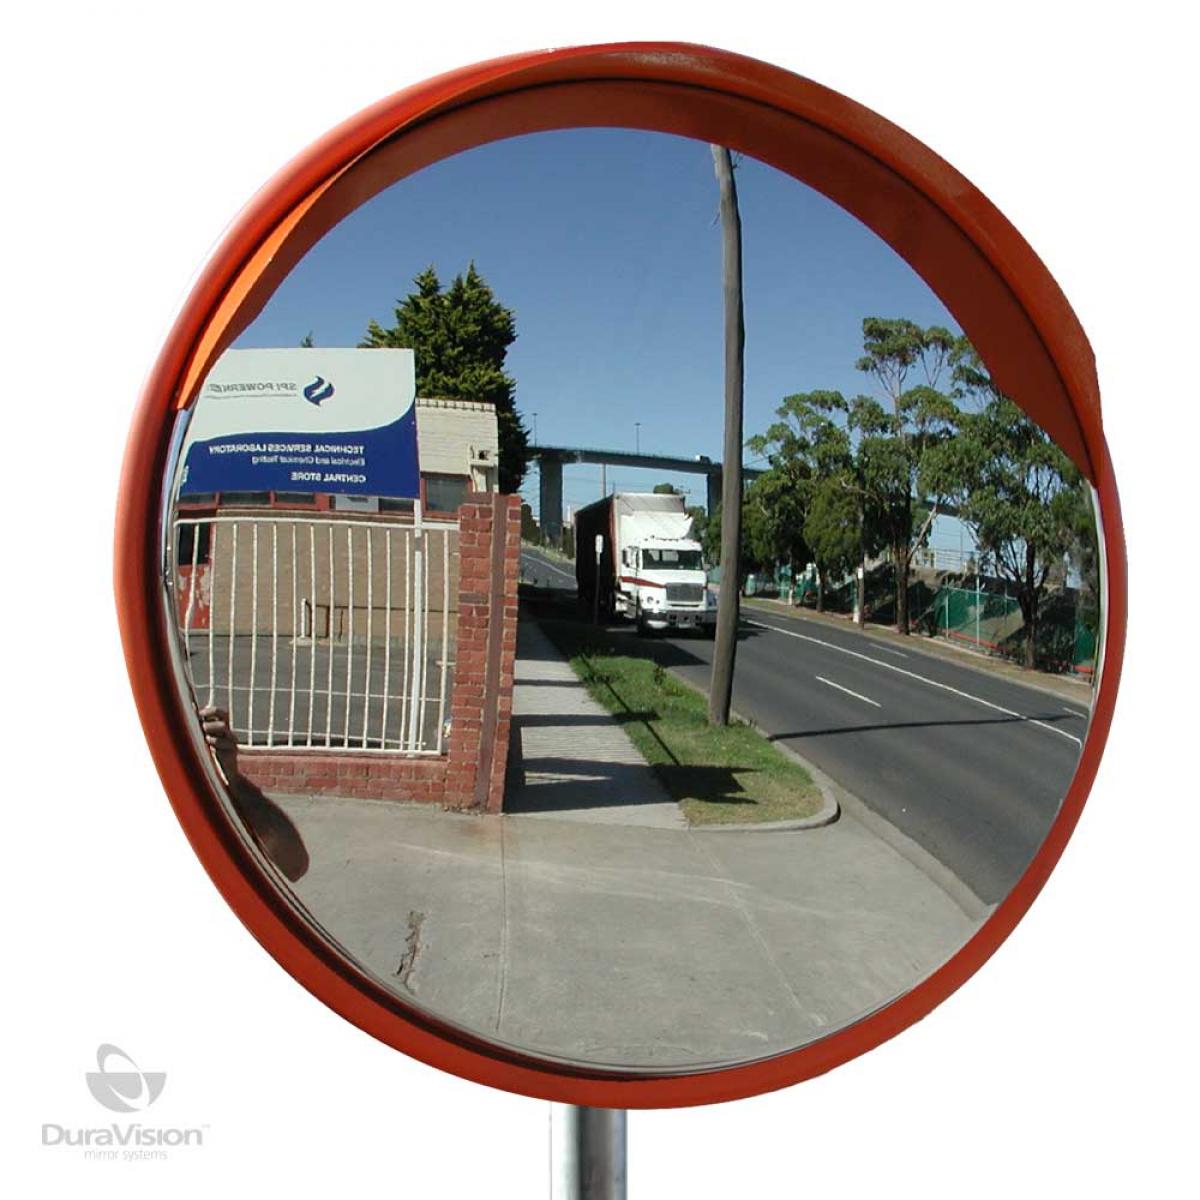 https://www.convexmirror.com.au/image/cache/catalog/products/1000mm-deluxe-traffic-stainless-steel-mirror-1200x1200.jpg